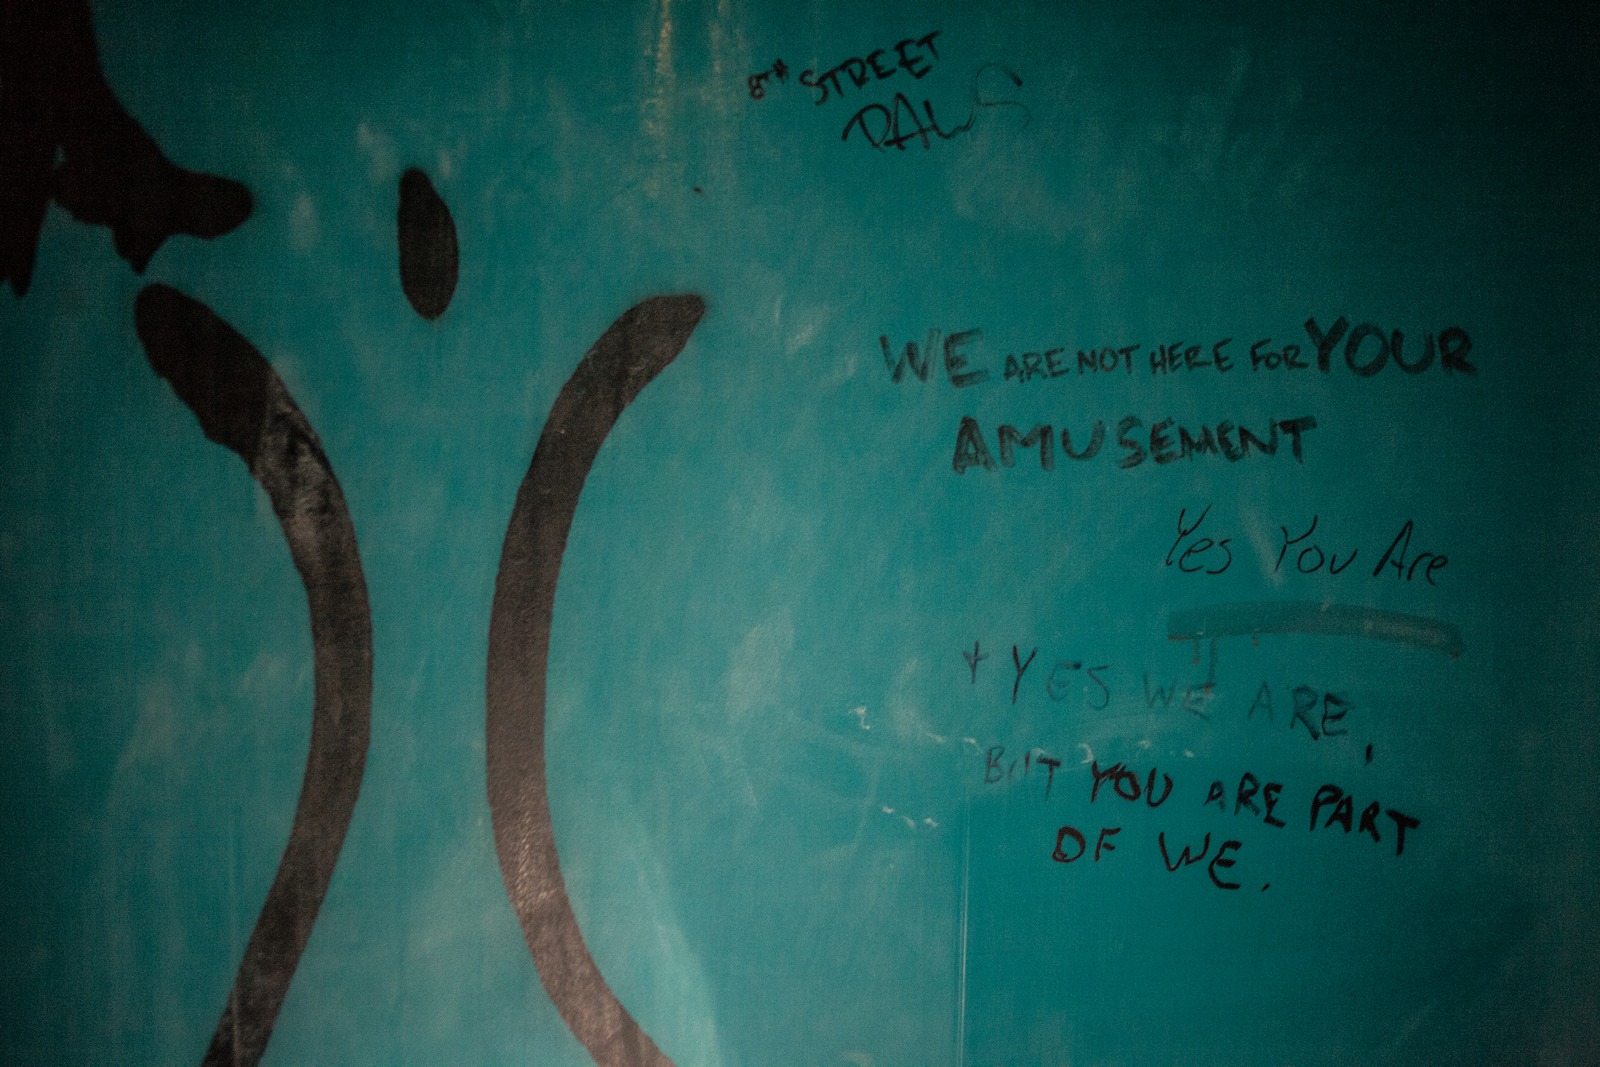 Burning Man - Funny messages in the restrooms